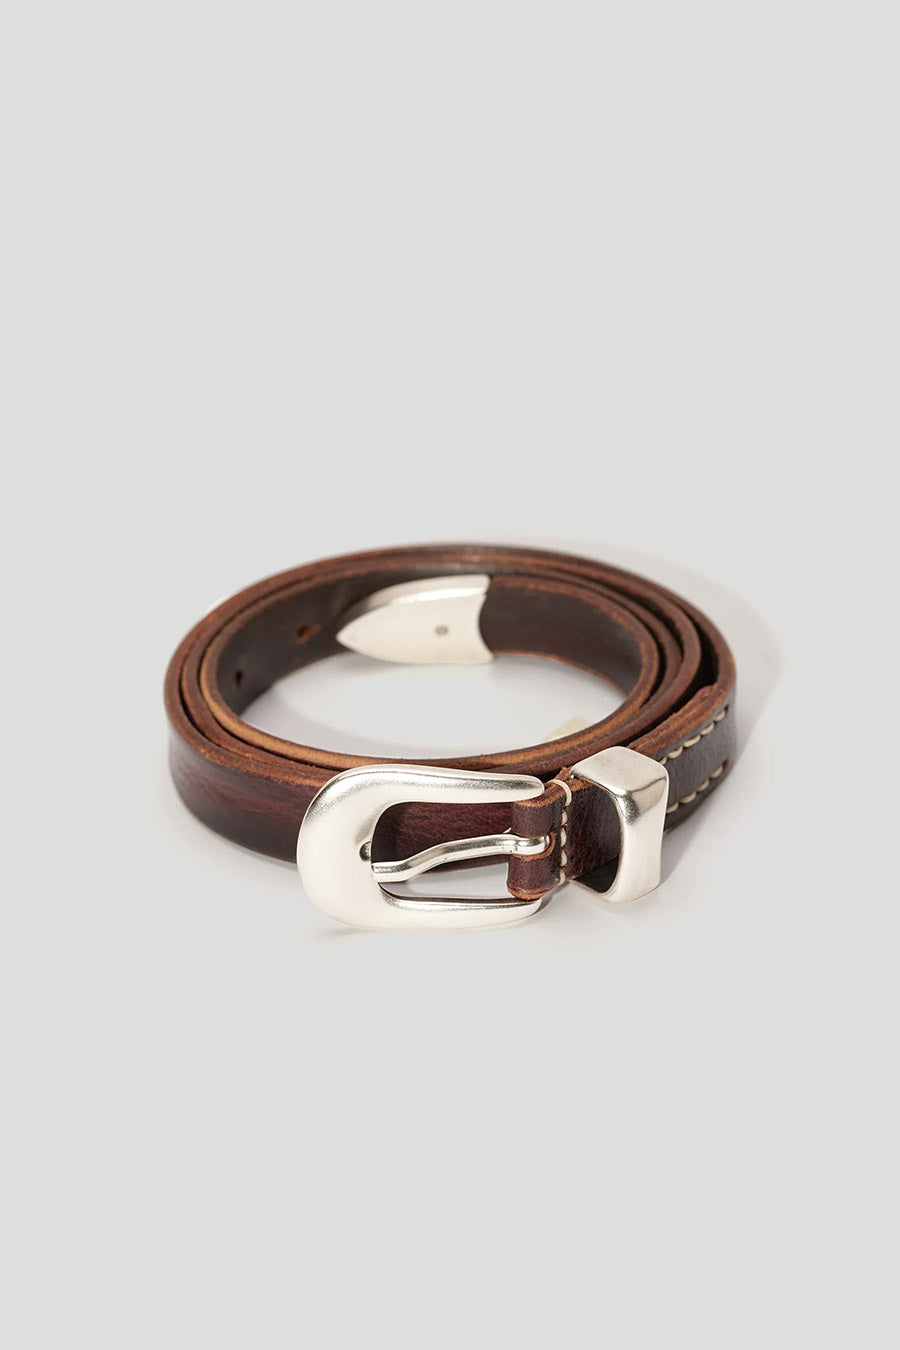 Our Legacy - 2 CM BROWN LEATHER BELT - LE LABO STORE